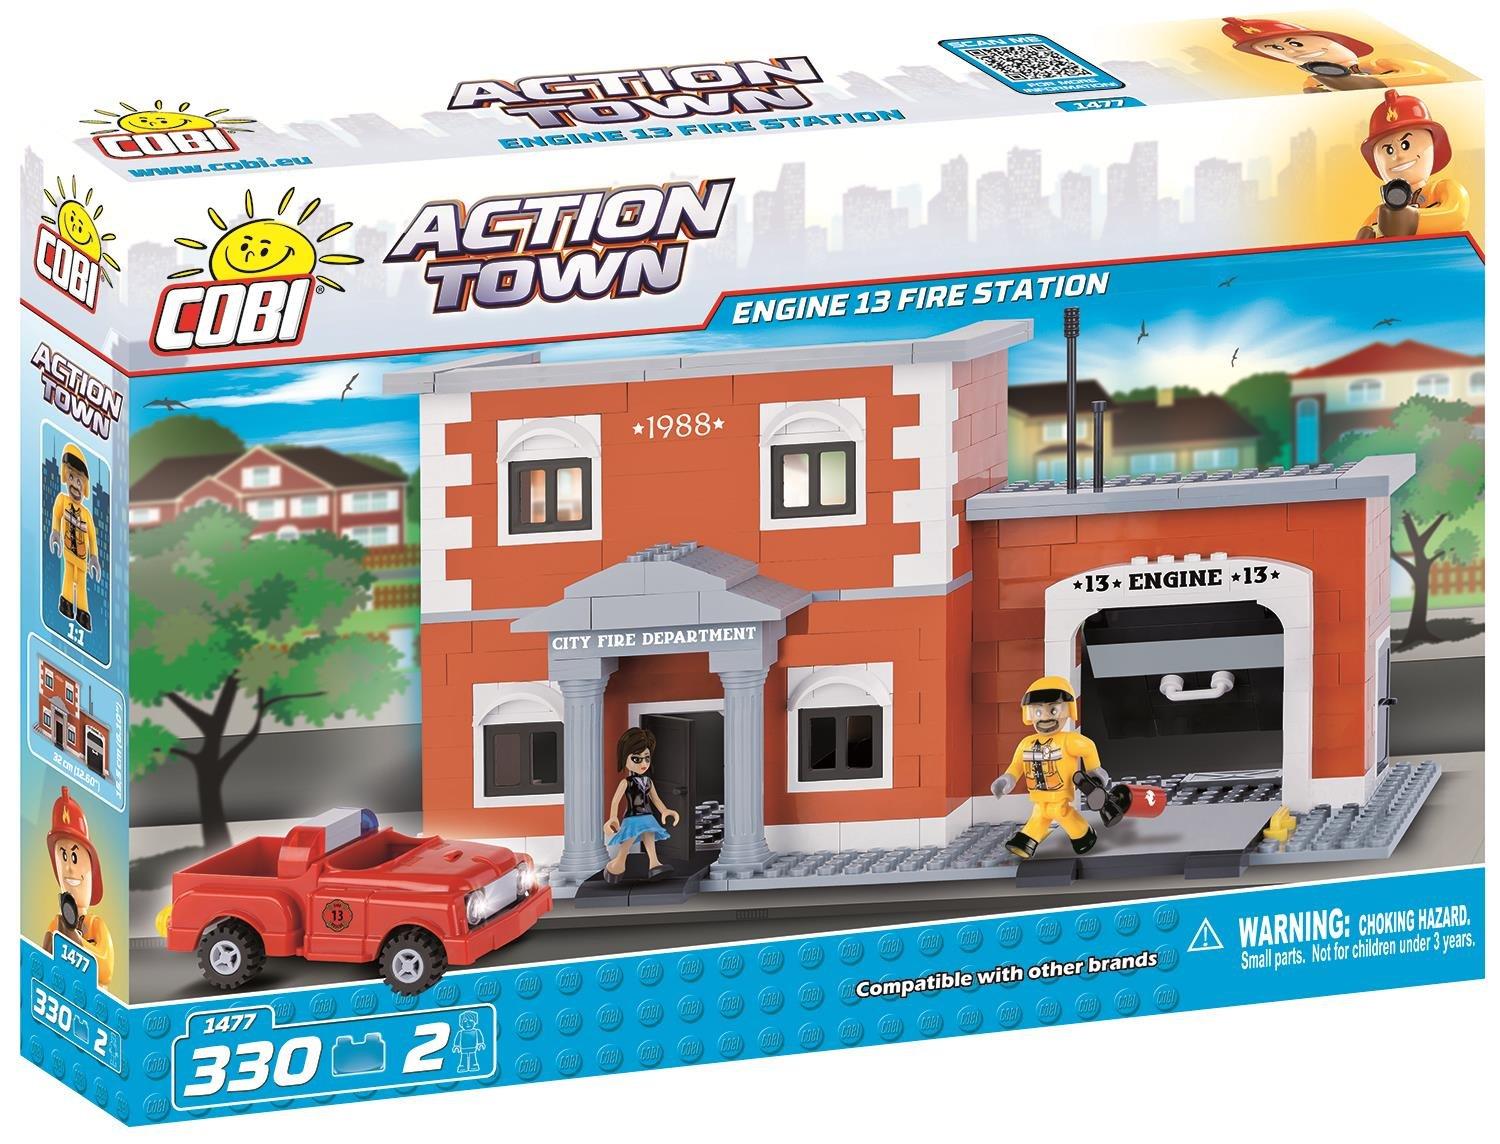 Cobi Fire Station With Patrol Vehicle Toy Building Blocks 330 Piece Compatible Age 5+